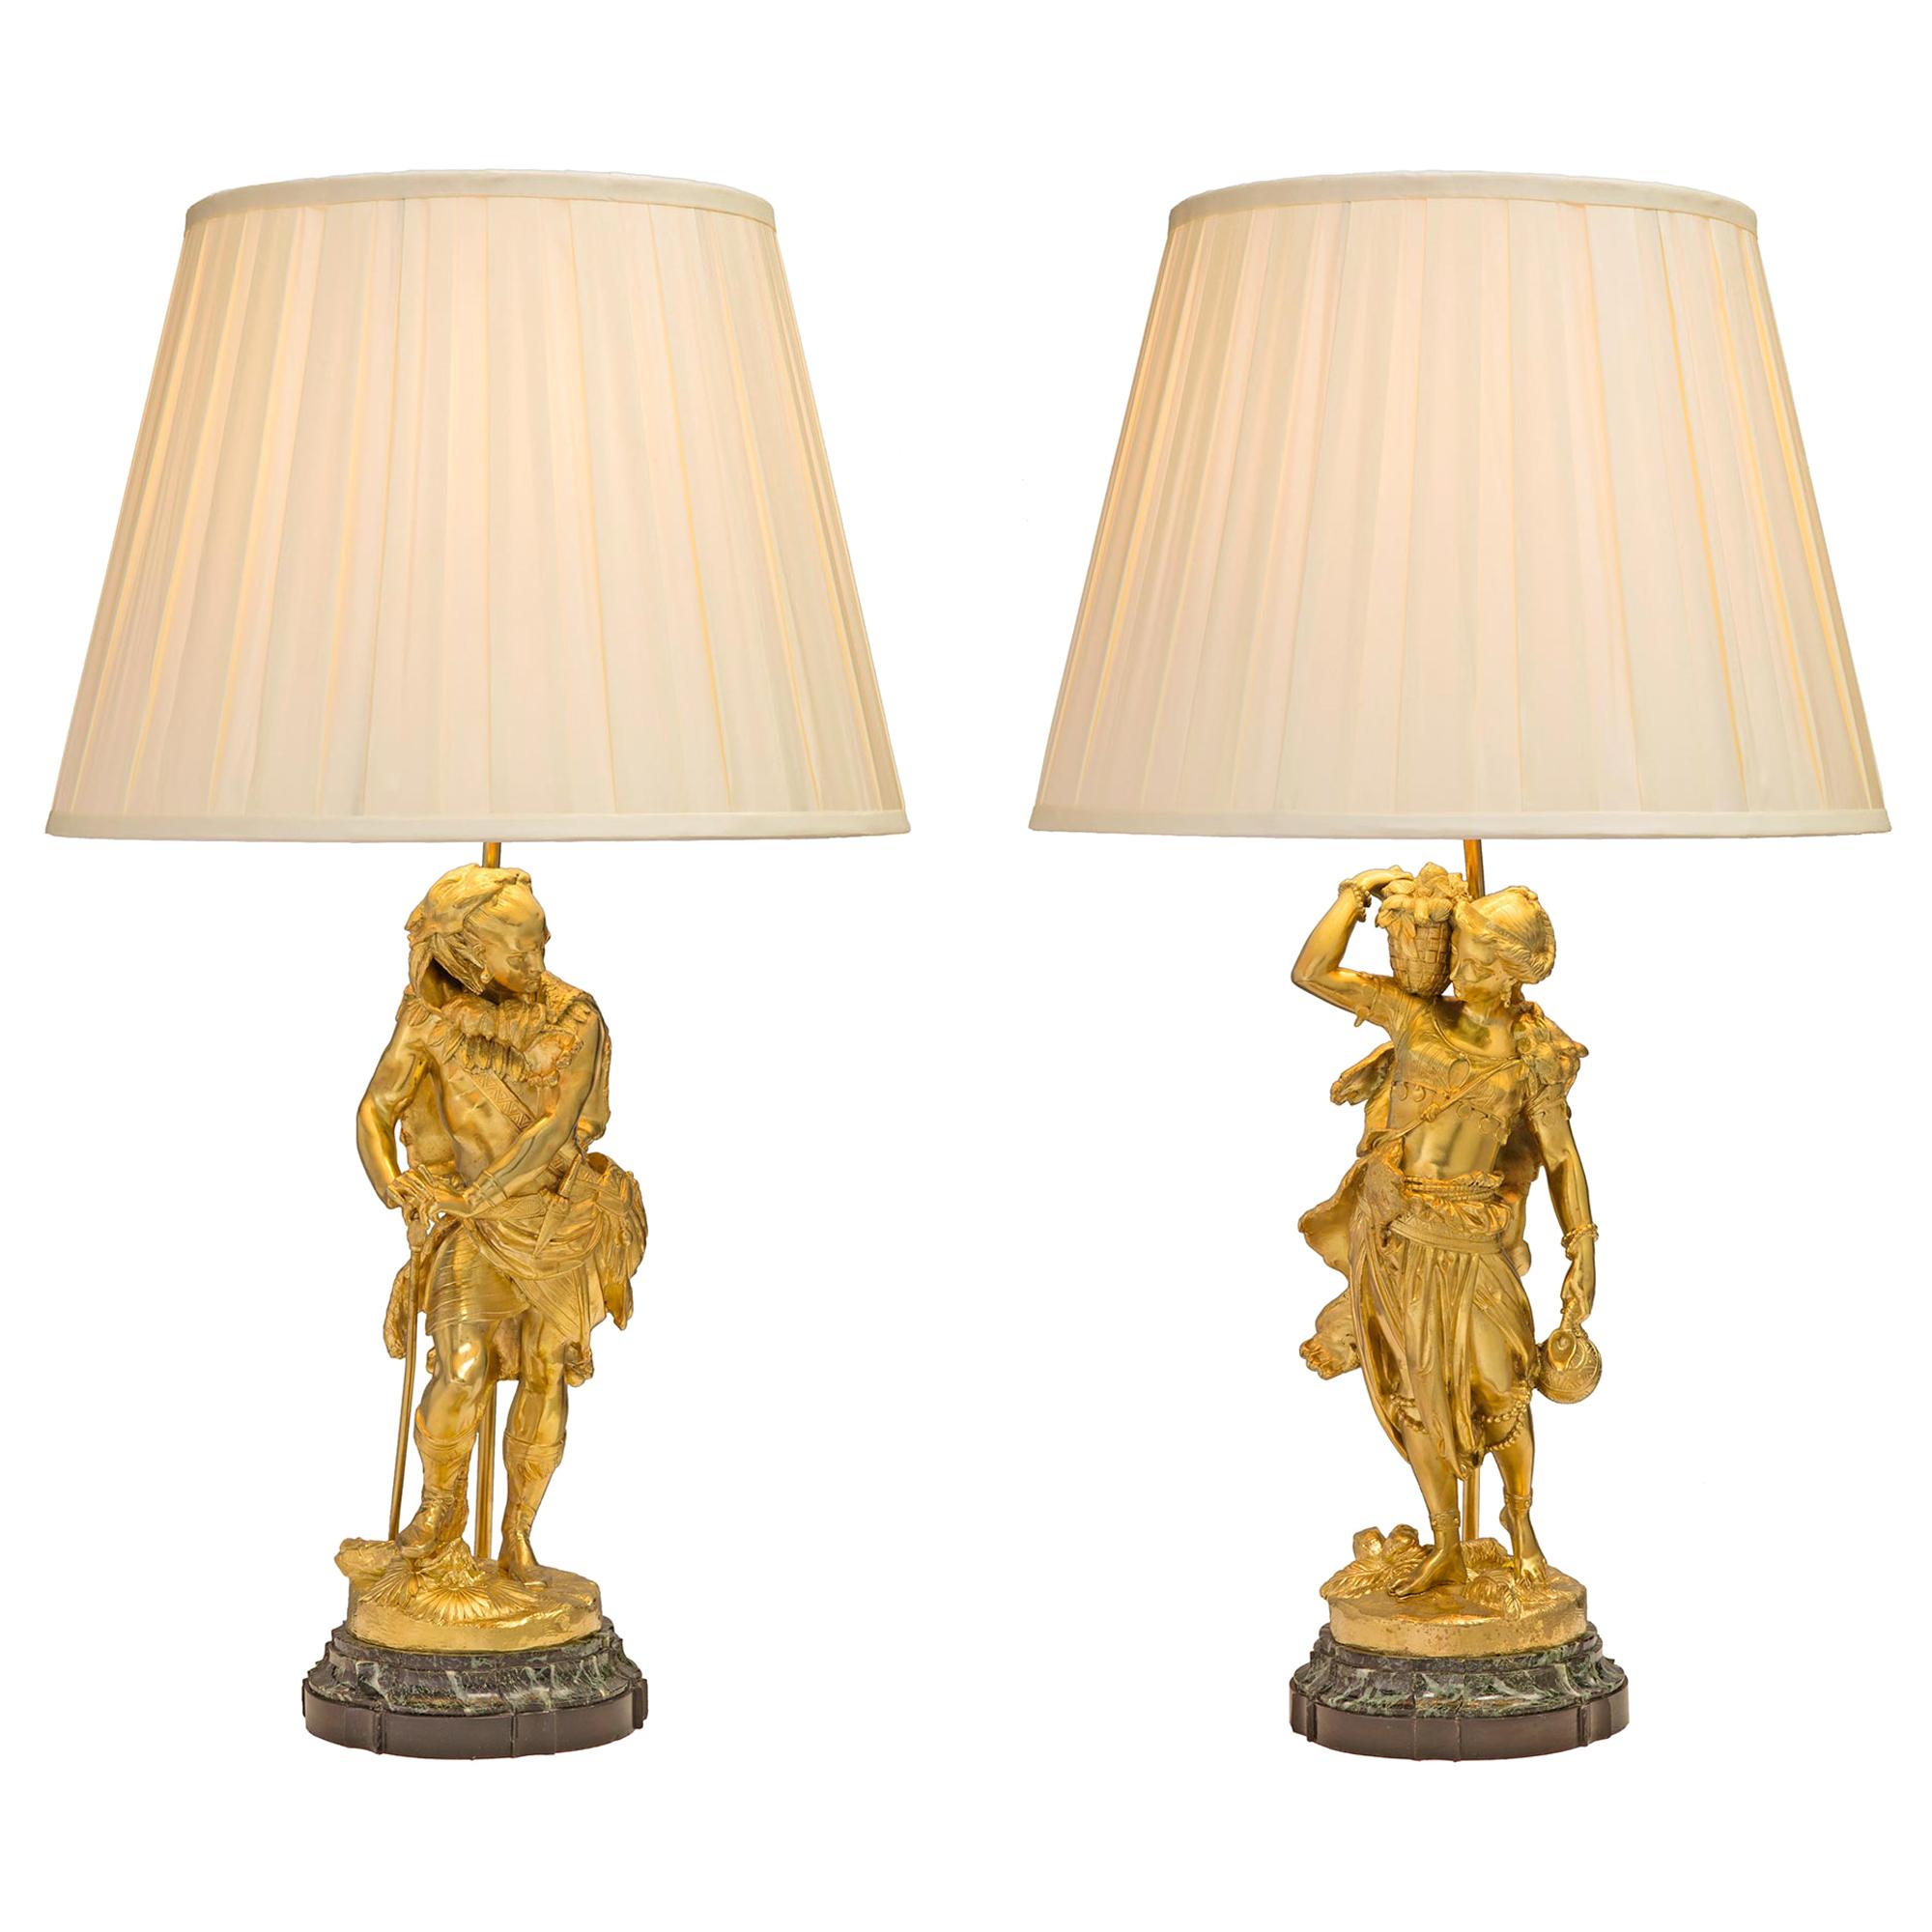 Pair of French 19th Century Belle Époque Period Statues Mounted into Lamps